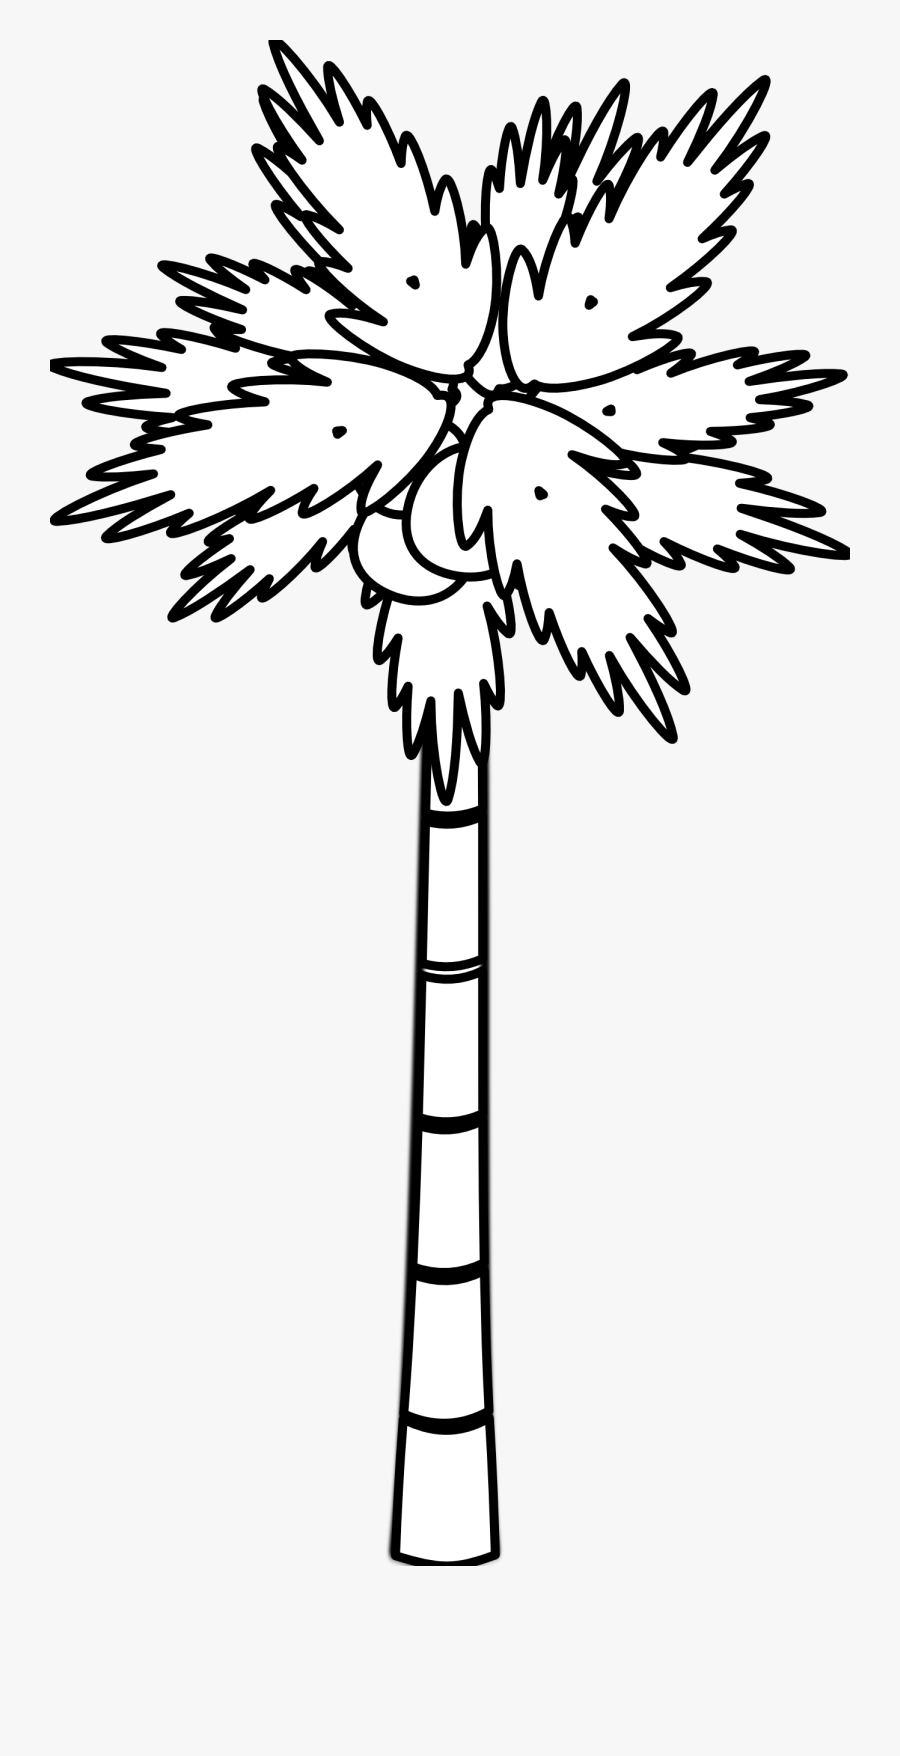 And Black Drawing Palm Tree White, Transparent Clipart